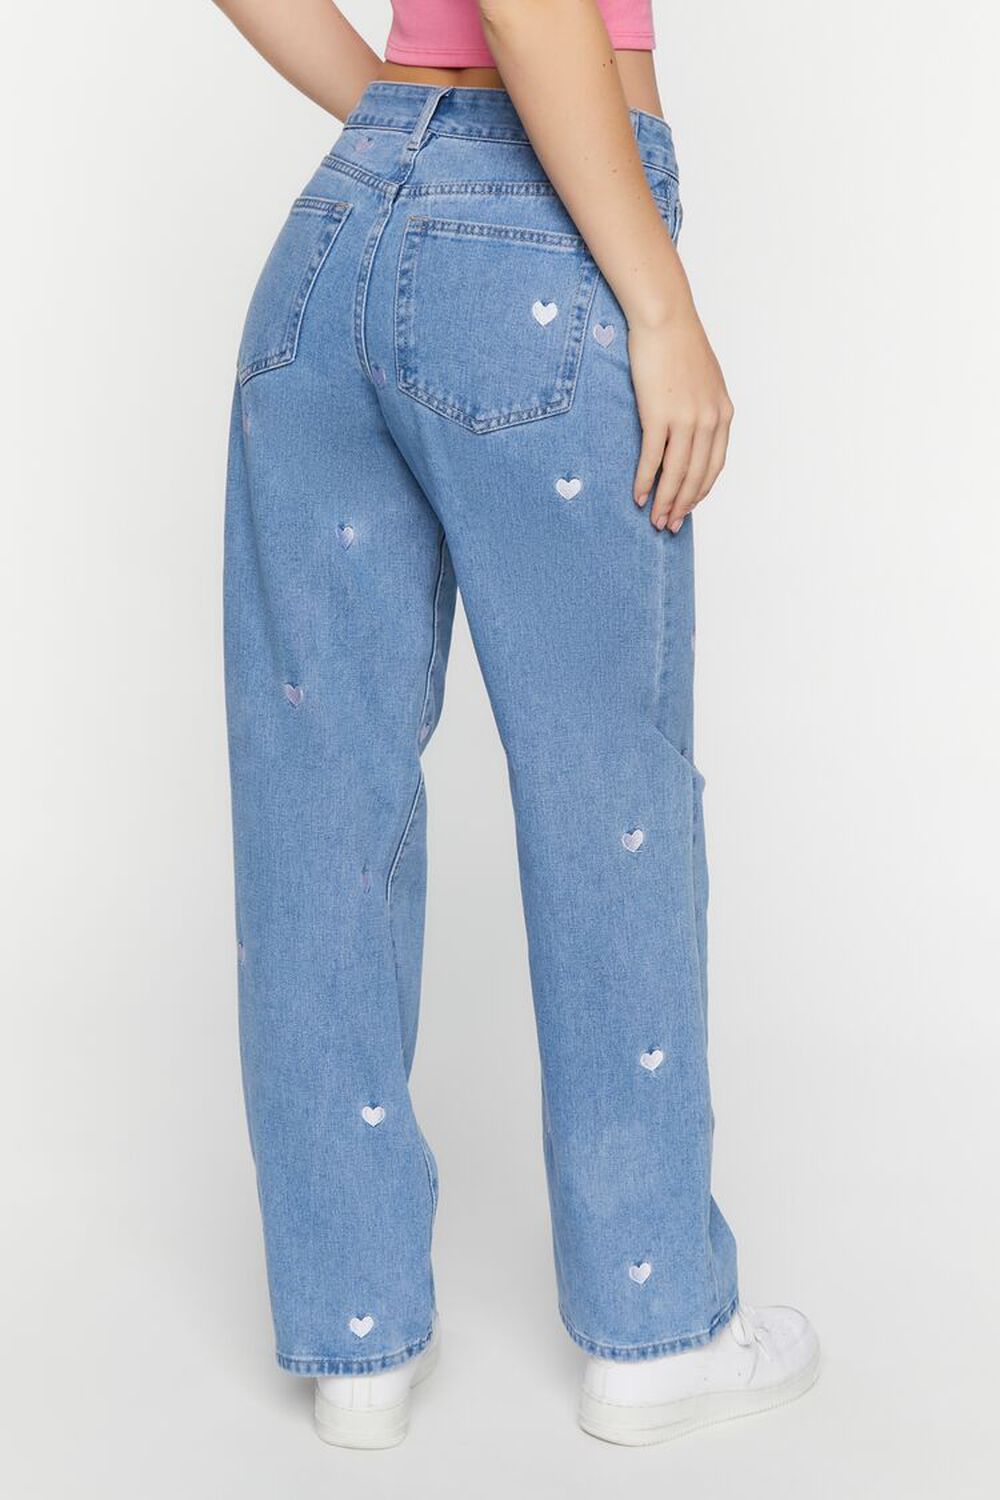 LIGHT DENIM Heart Embroidered 90s-Fit Jeans, image 3